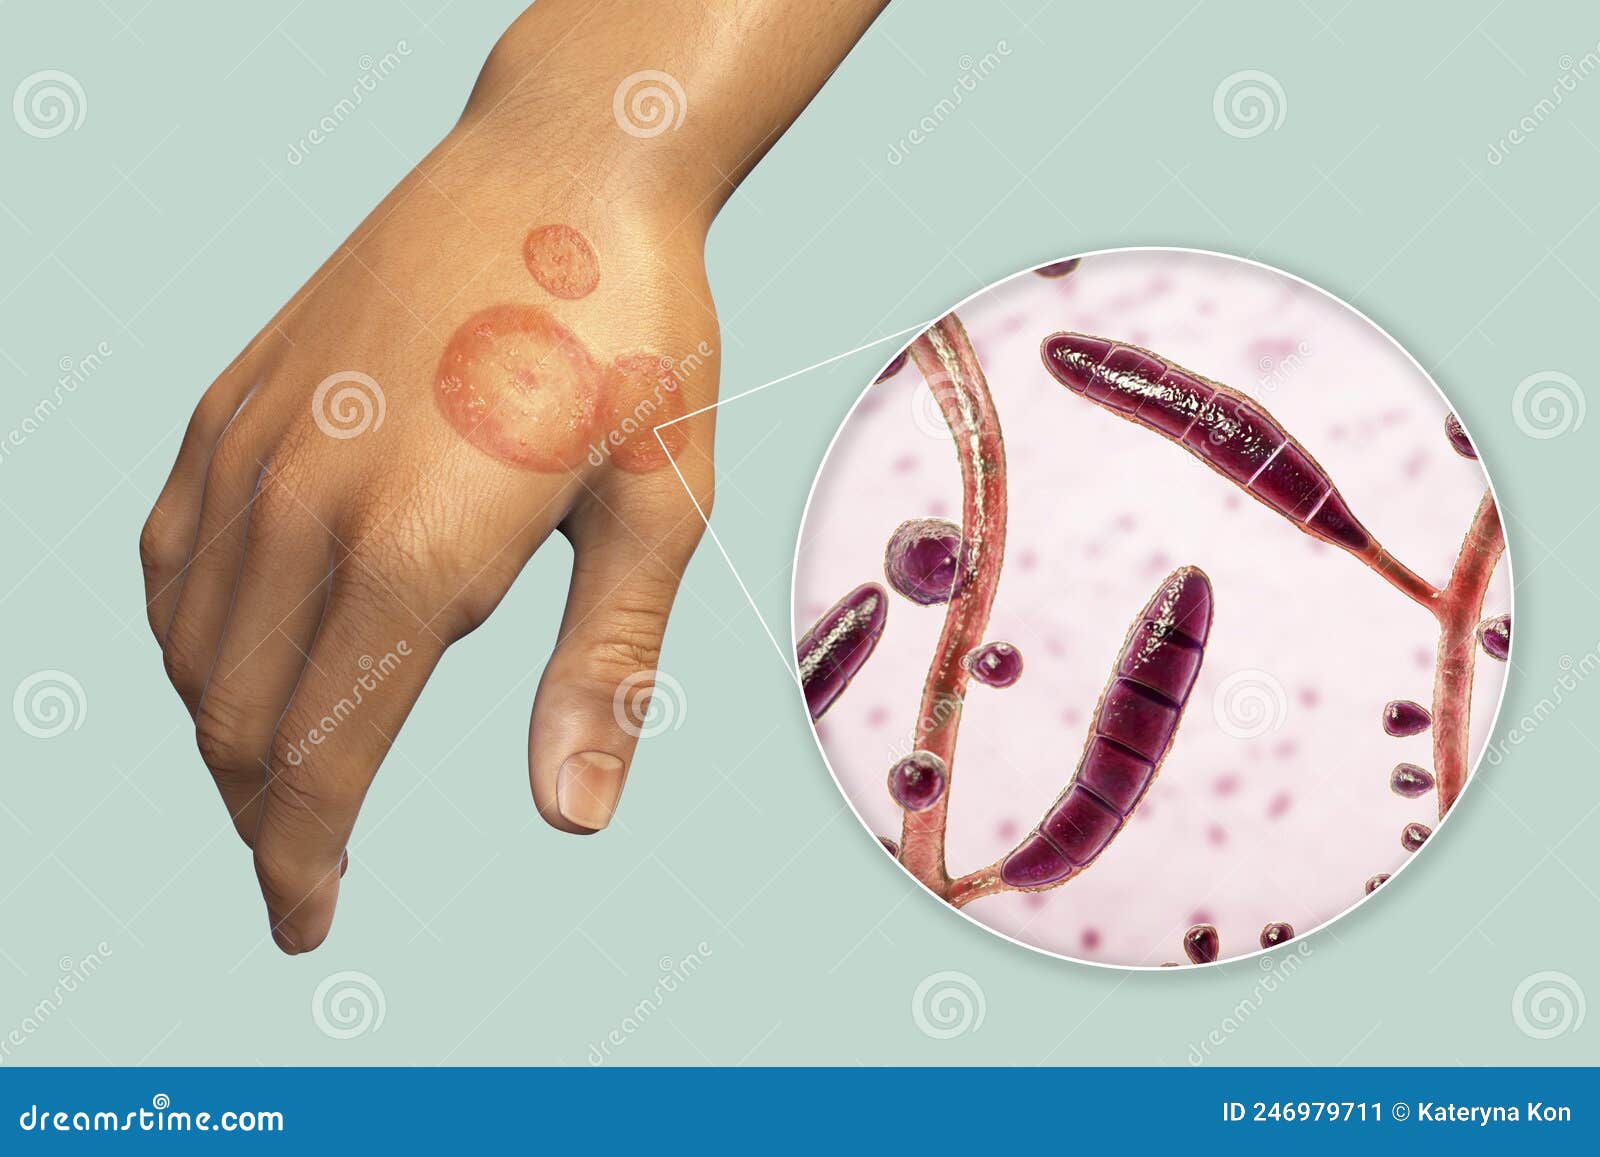 Fungal Infection on a Man S Hand. Tinea Manuum and Close-up View of  Dermatophyte Fungi, 3D Illustration Stock Illustration - Illustration of  tinea, fungi: 246979711